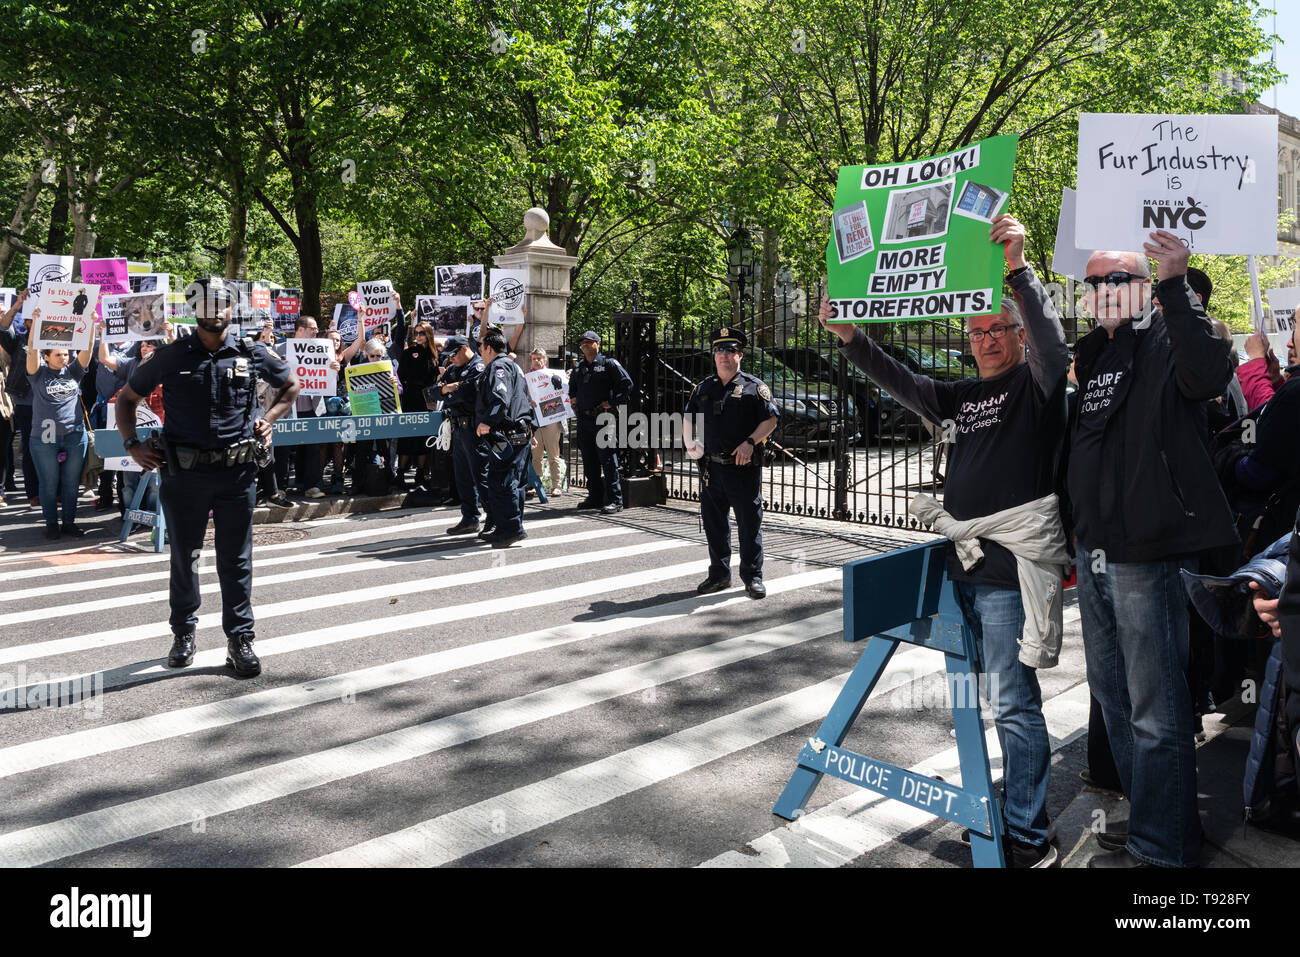 New York, United States. 15th May, 2019. Anti-fur activists rallied in front of City Hall in New York City before the scheduled Council hearing to ban the sale of fur in New York City. Opposite the activists, fur store owners alongside their employees rallied against the proposed ban. A ban on fur sales, they fear, would create unemployment and be detrimental to small business owners. Credit: Gabriele Holtermann-Gorden/Pacific Press/Alamy Live News Stock Photo